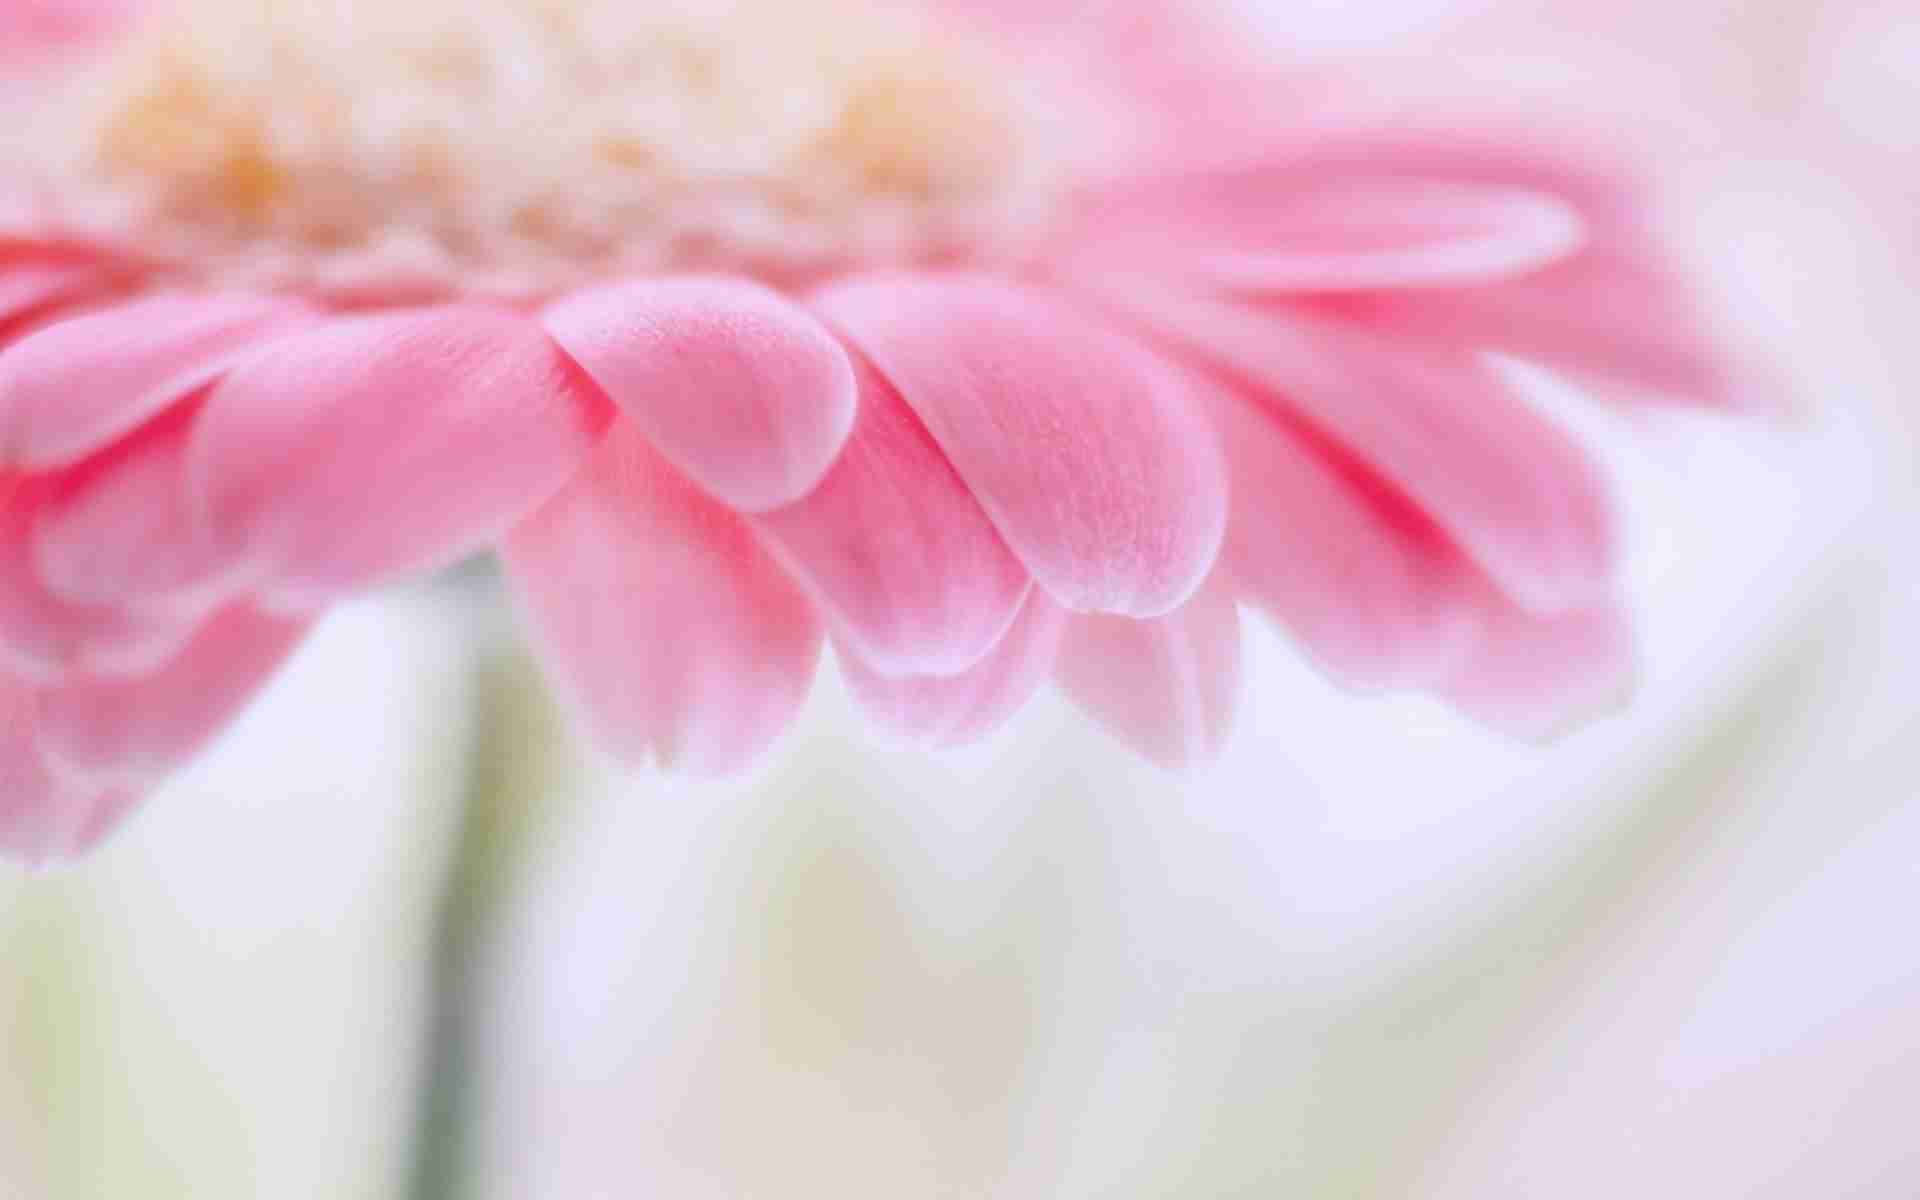 DOWNLOAD: flower-pink-light-petals free picture 2560 x 1600